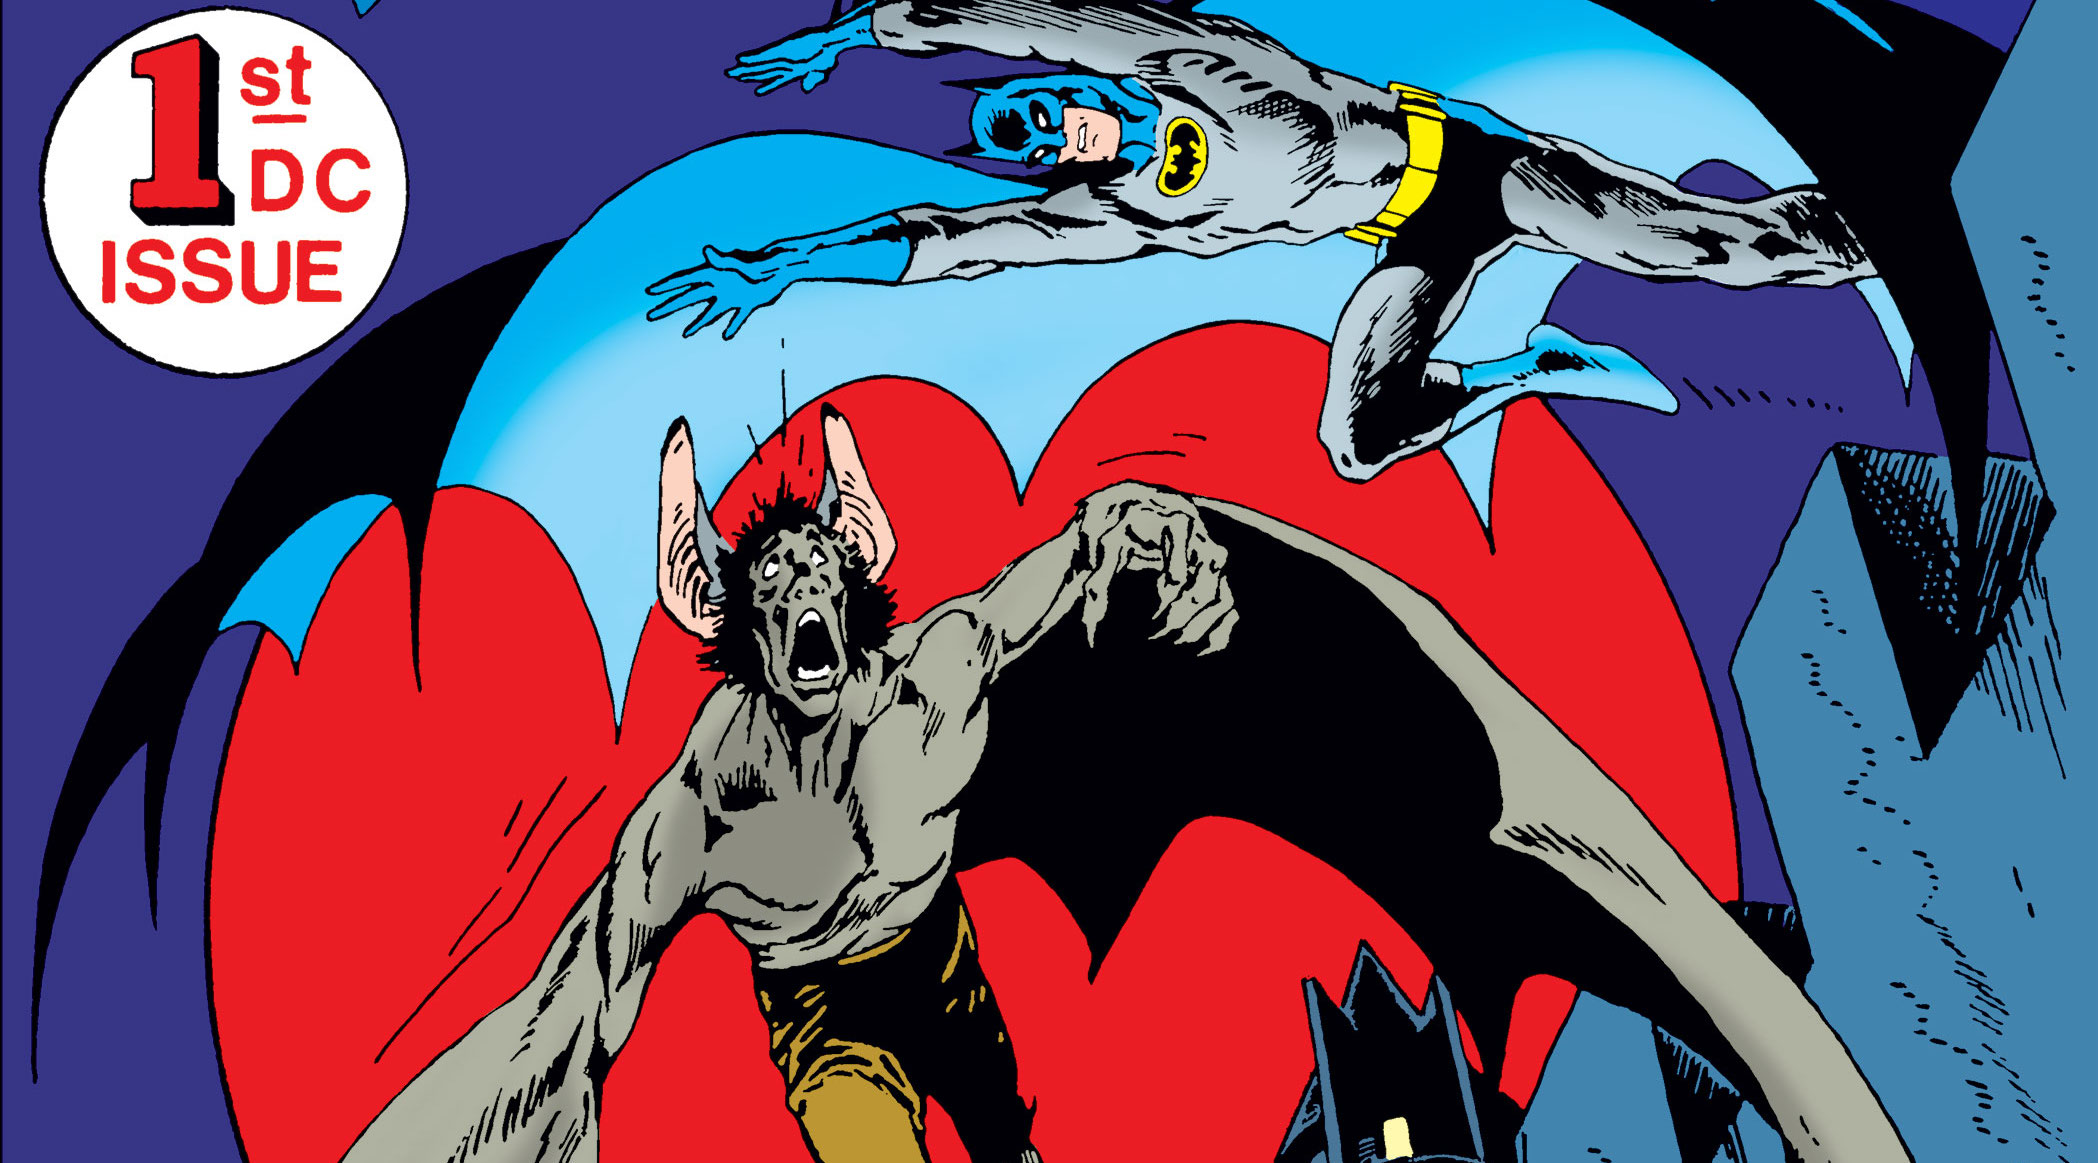 Conway and Ditko's MAN-BAT #1 to Be Re-Released as a Facsimile Edition |  13th Dimension, Comics, Creators, Culture